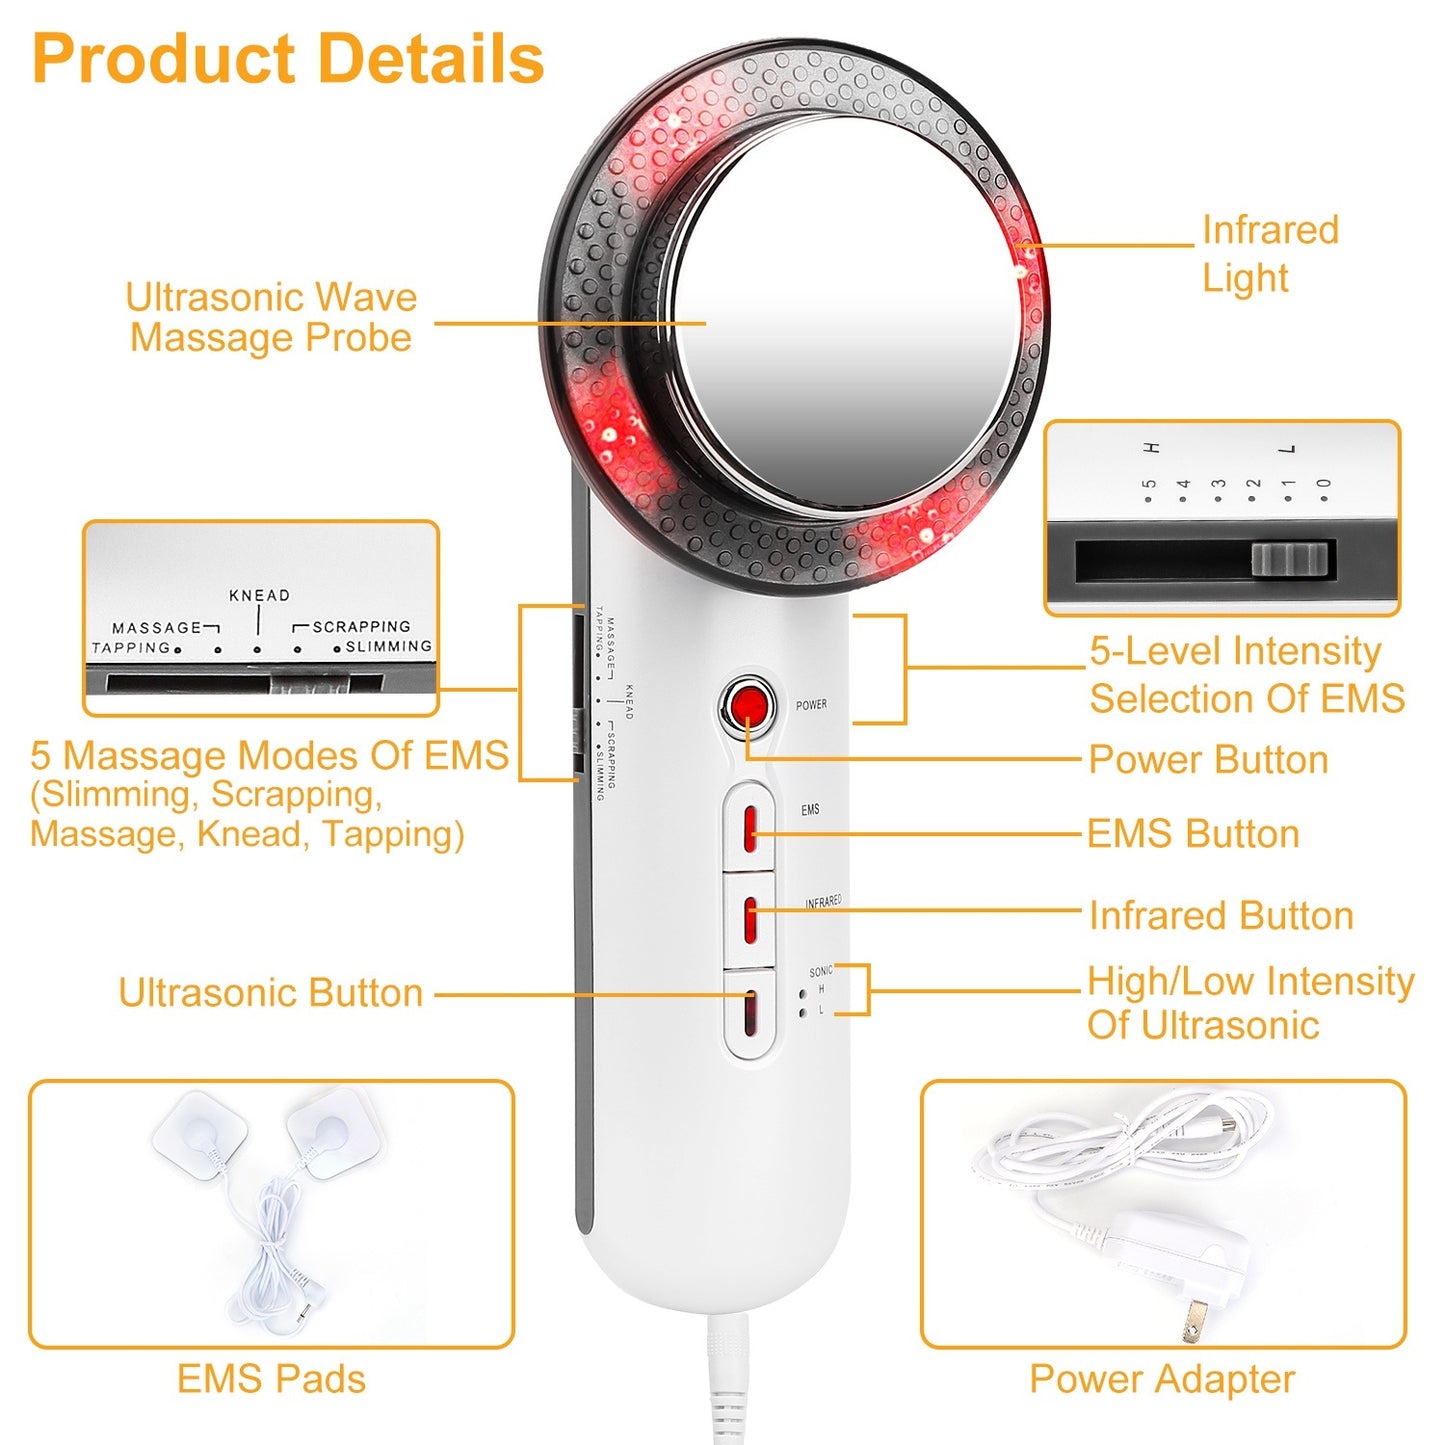 Ultrasonic Body Shaping Machine 3 in 1 Multifunctional EMS Infrared Massager Fat Remover For Belly Waist Leg Arm Skincare